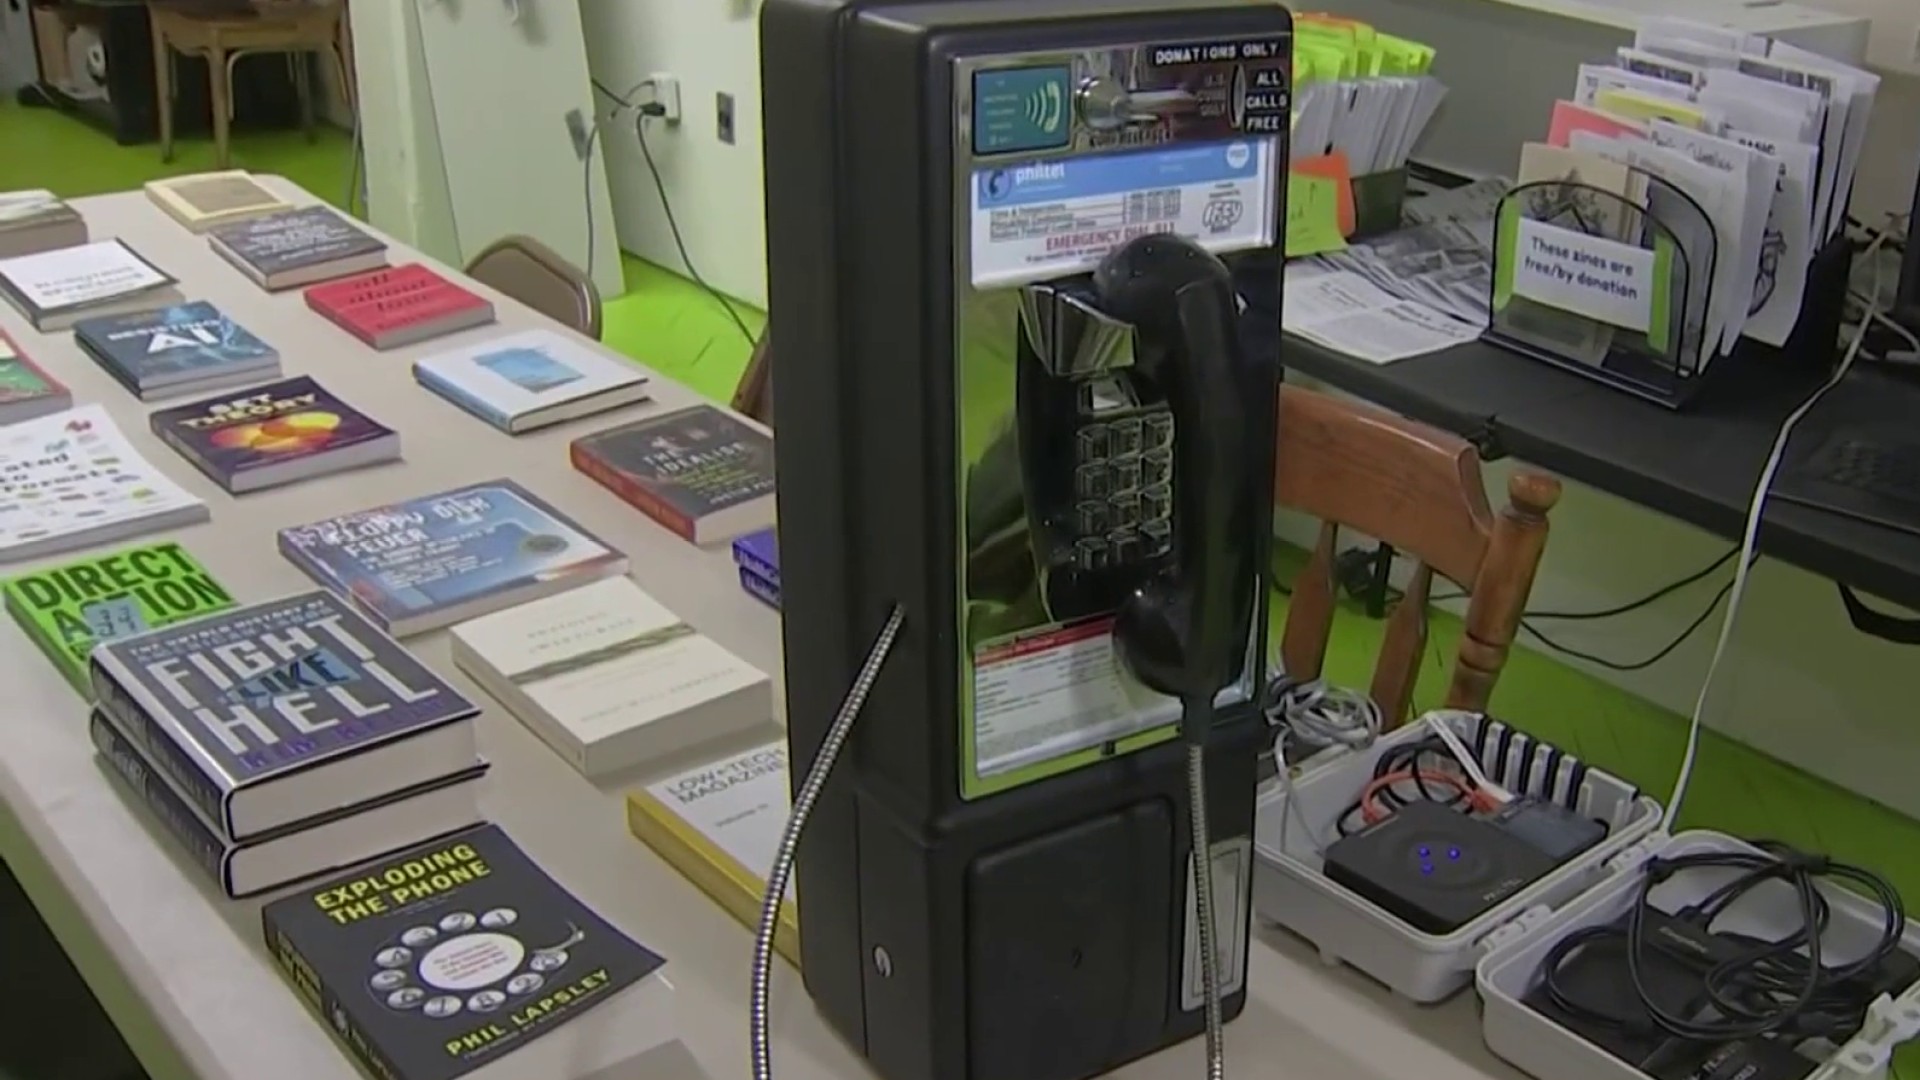 Remember Pay Phones? A Philly Man Is Bringing Them Back Without the
Pay Part